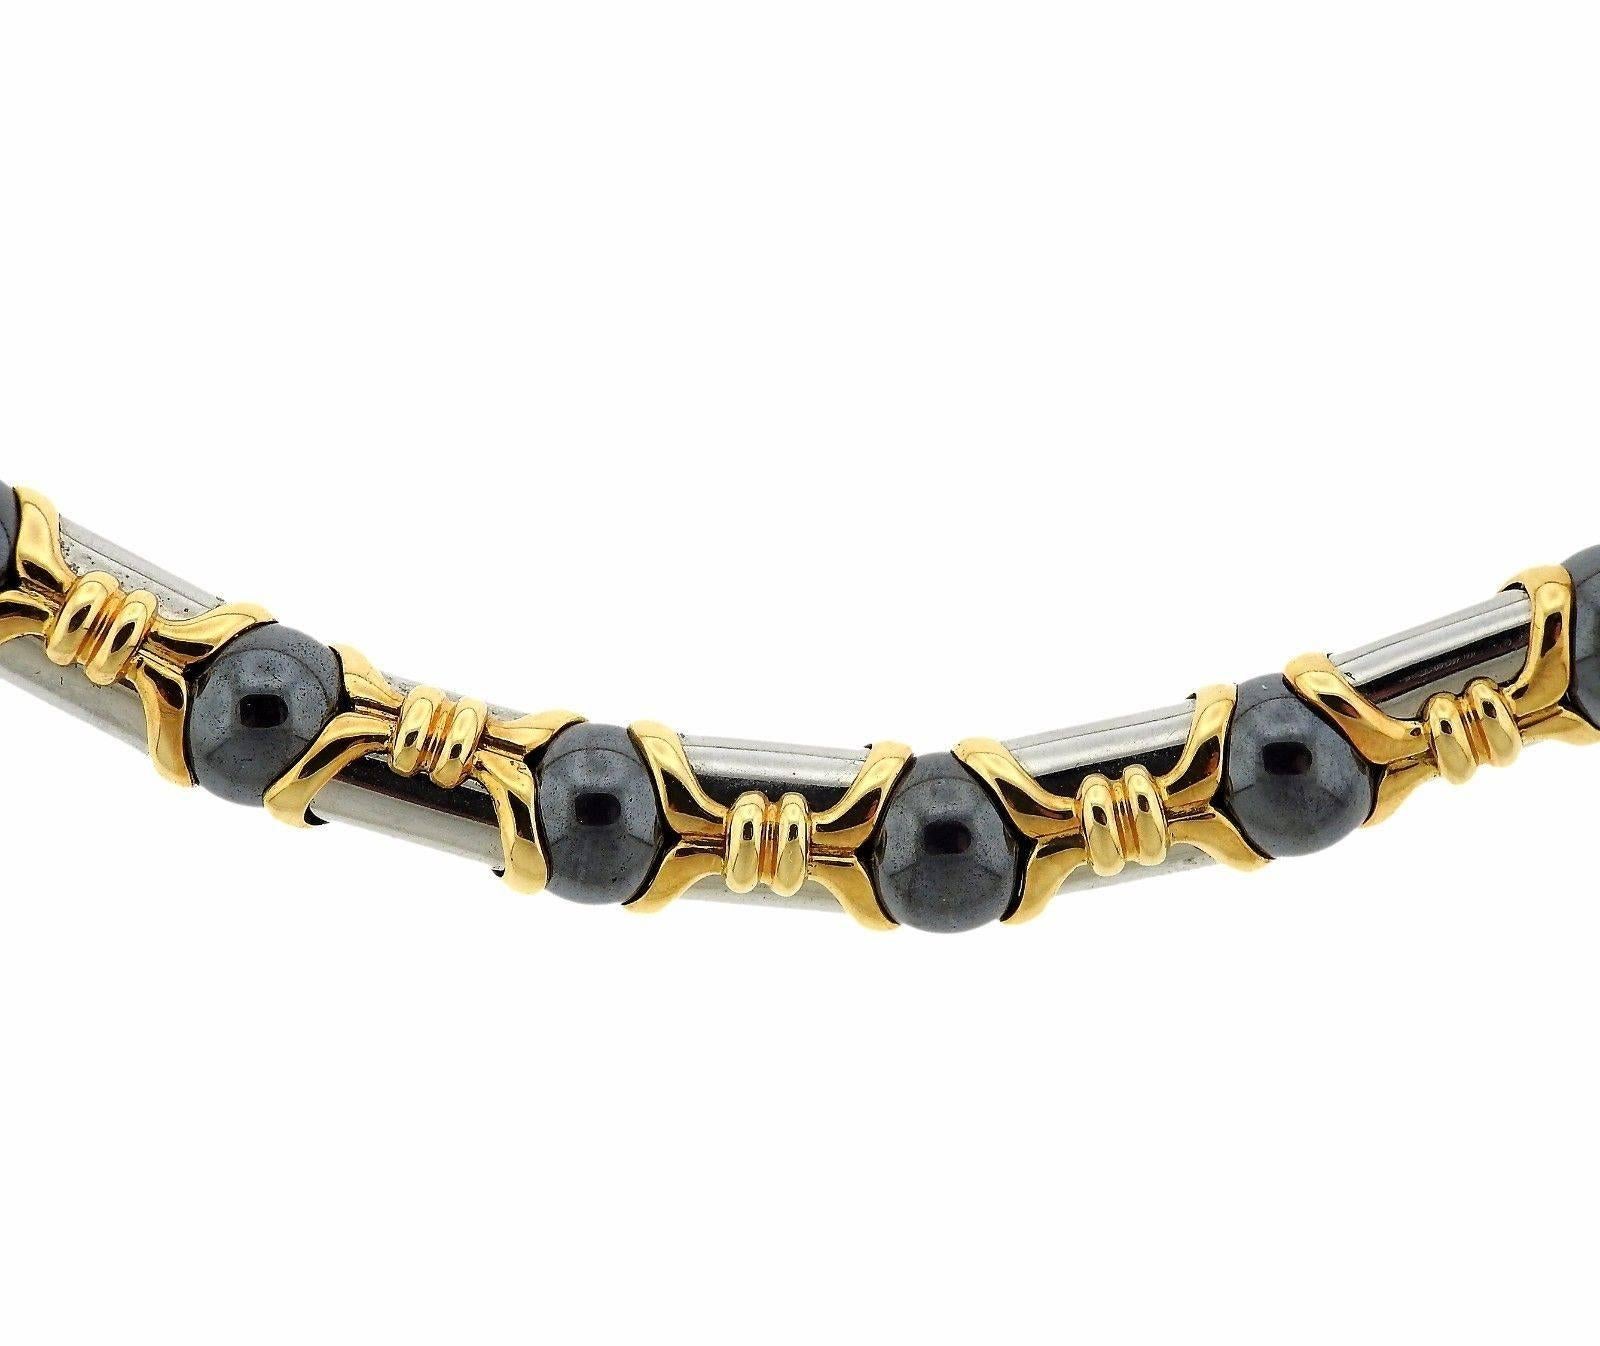 An 18k yellow gold and stainless steel necklace set with 8.4mm hematite stones.  The necklace is 16 1/2" long and weighs 105.5 grams.  Marked: Bvlgari, 750, M, 2337AL.